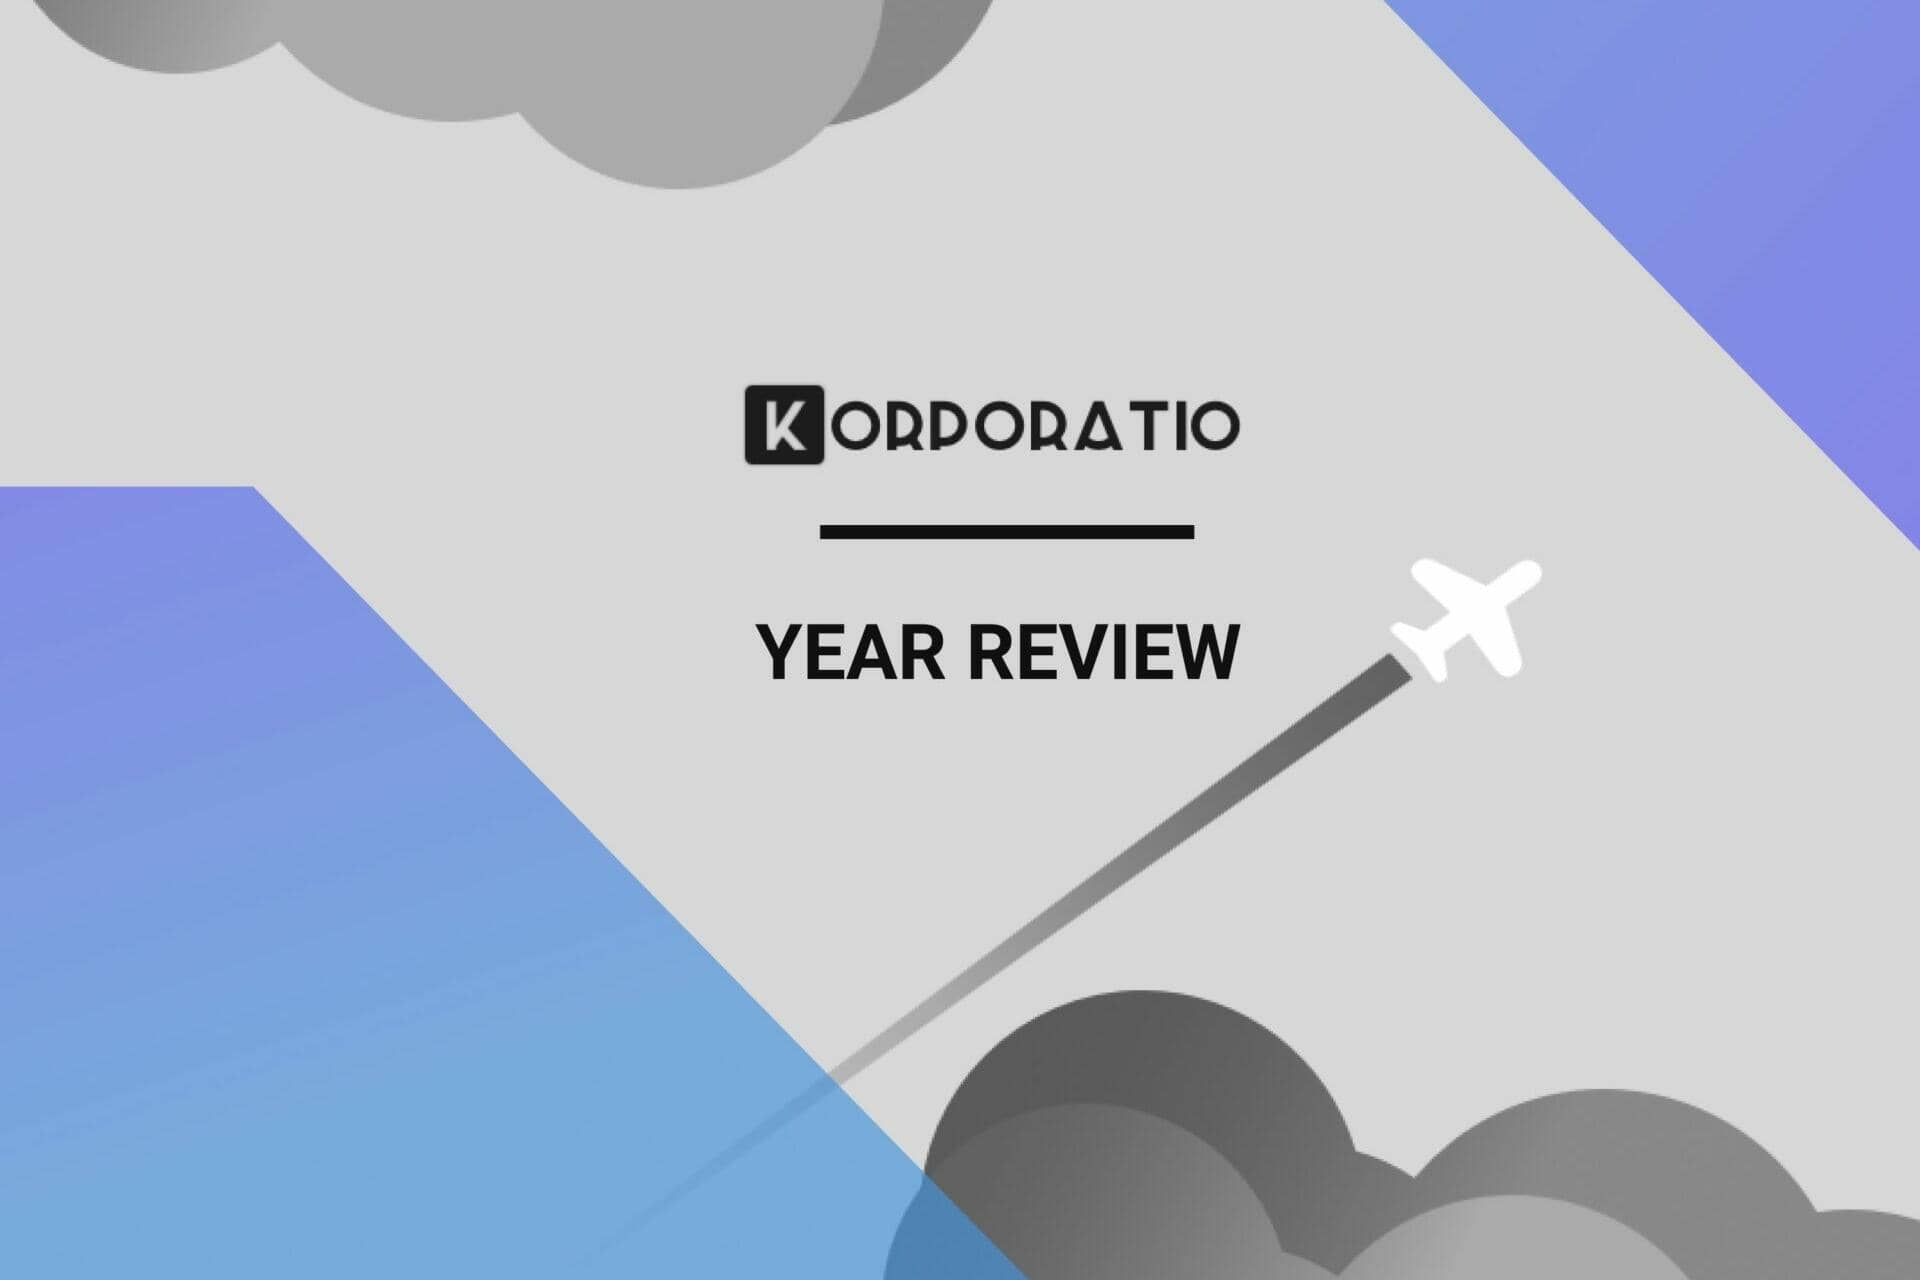 Year Review by Korporatio